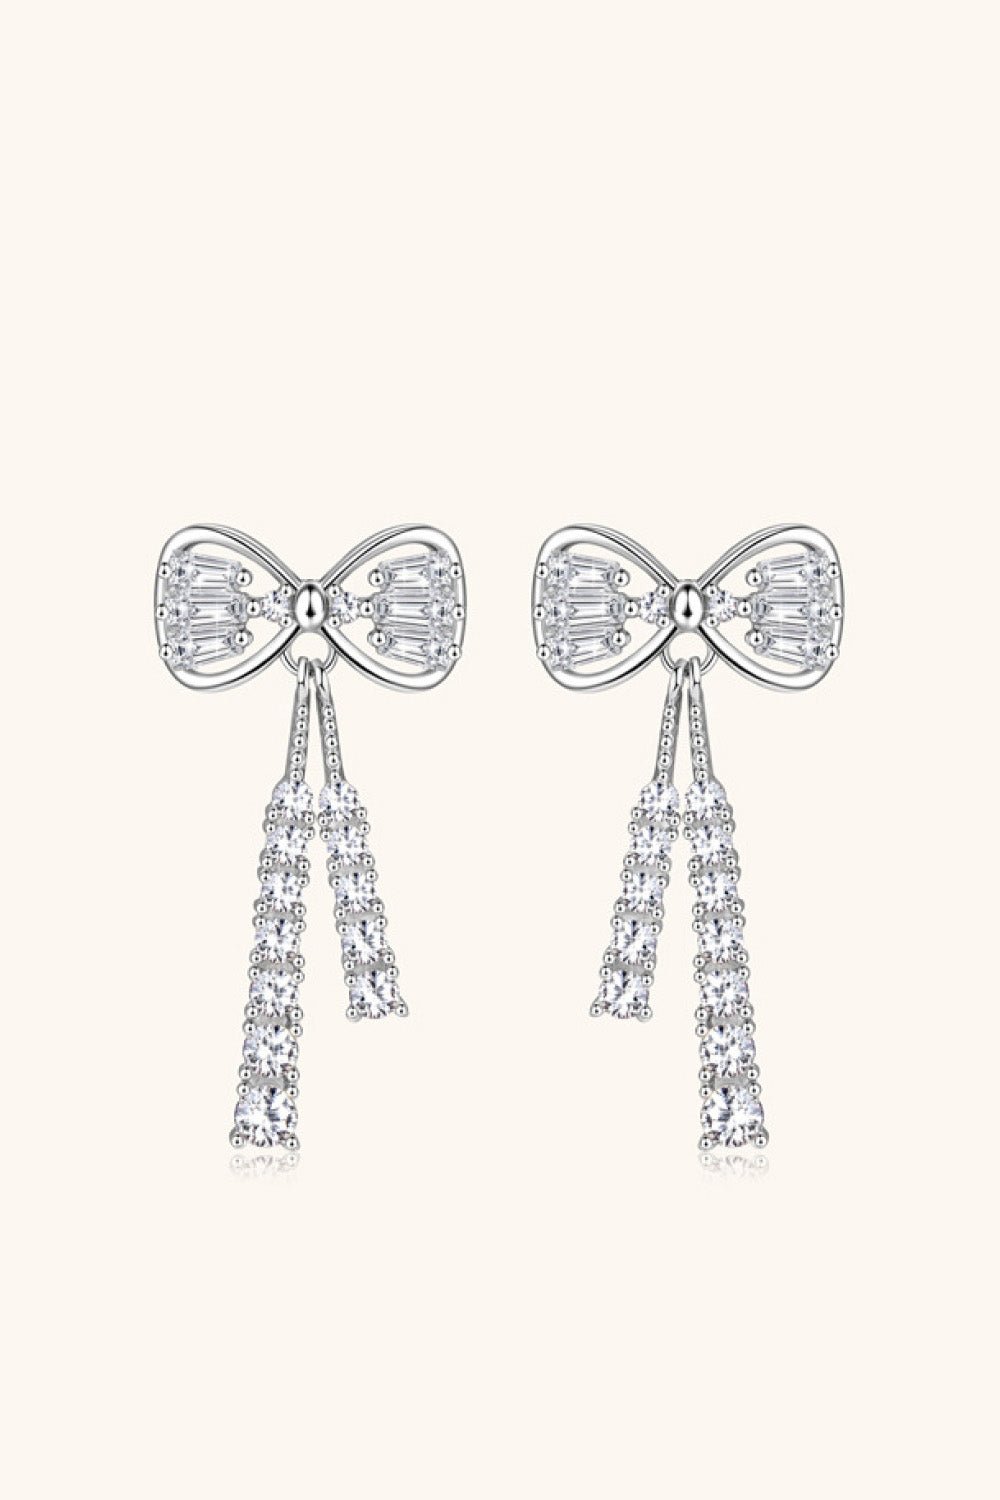 1.12 Carat Moissanite 925 Sterling Silver Bow Earrings - Uylee's Boutique